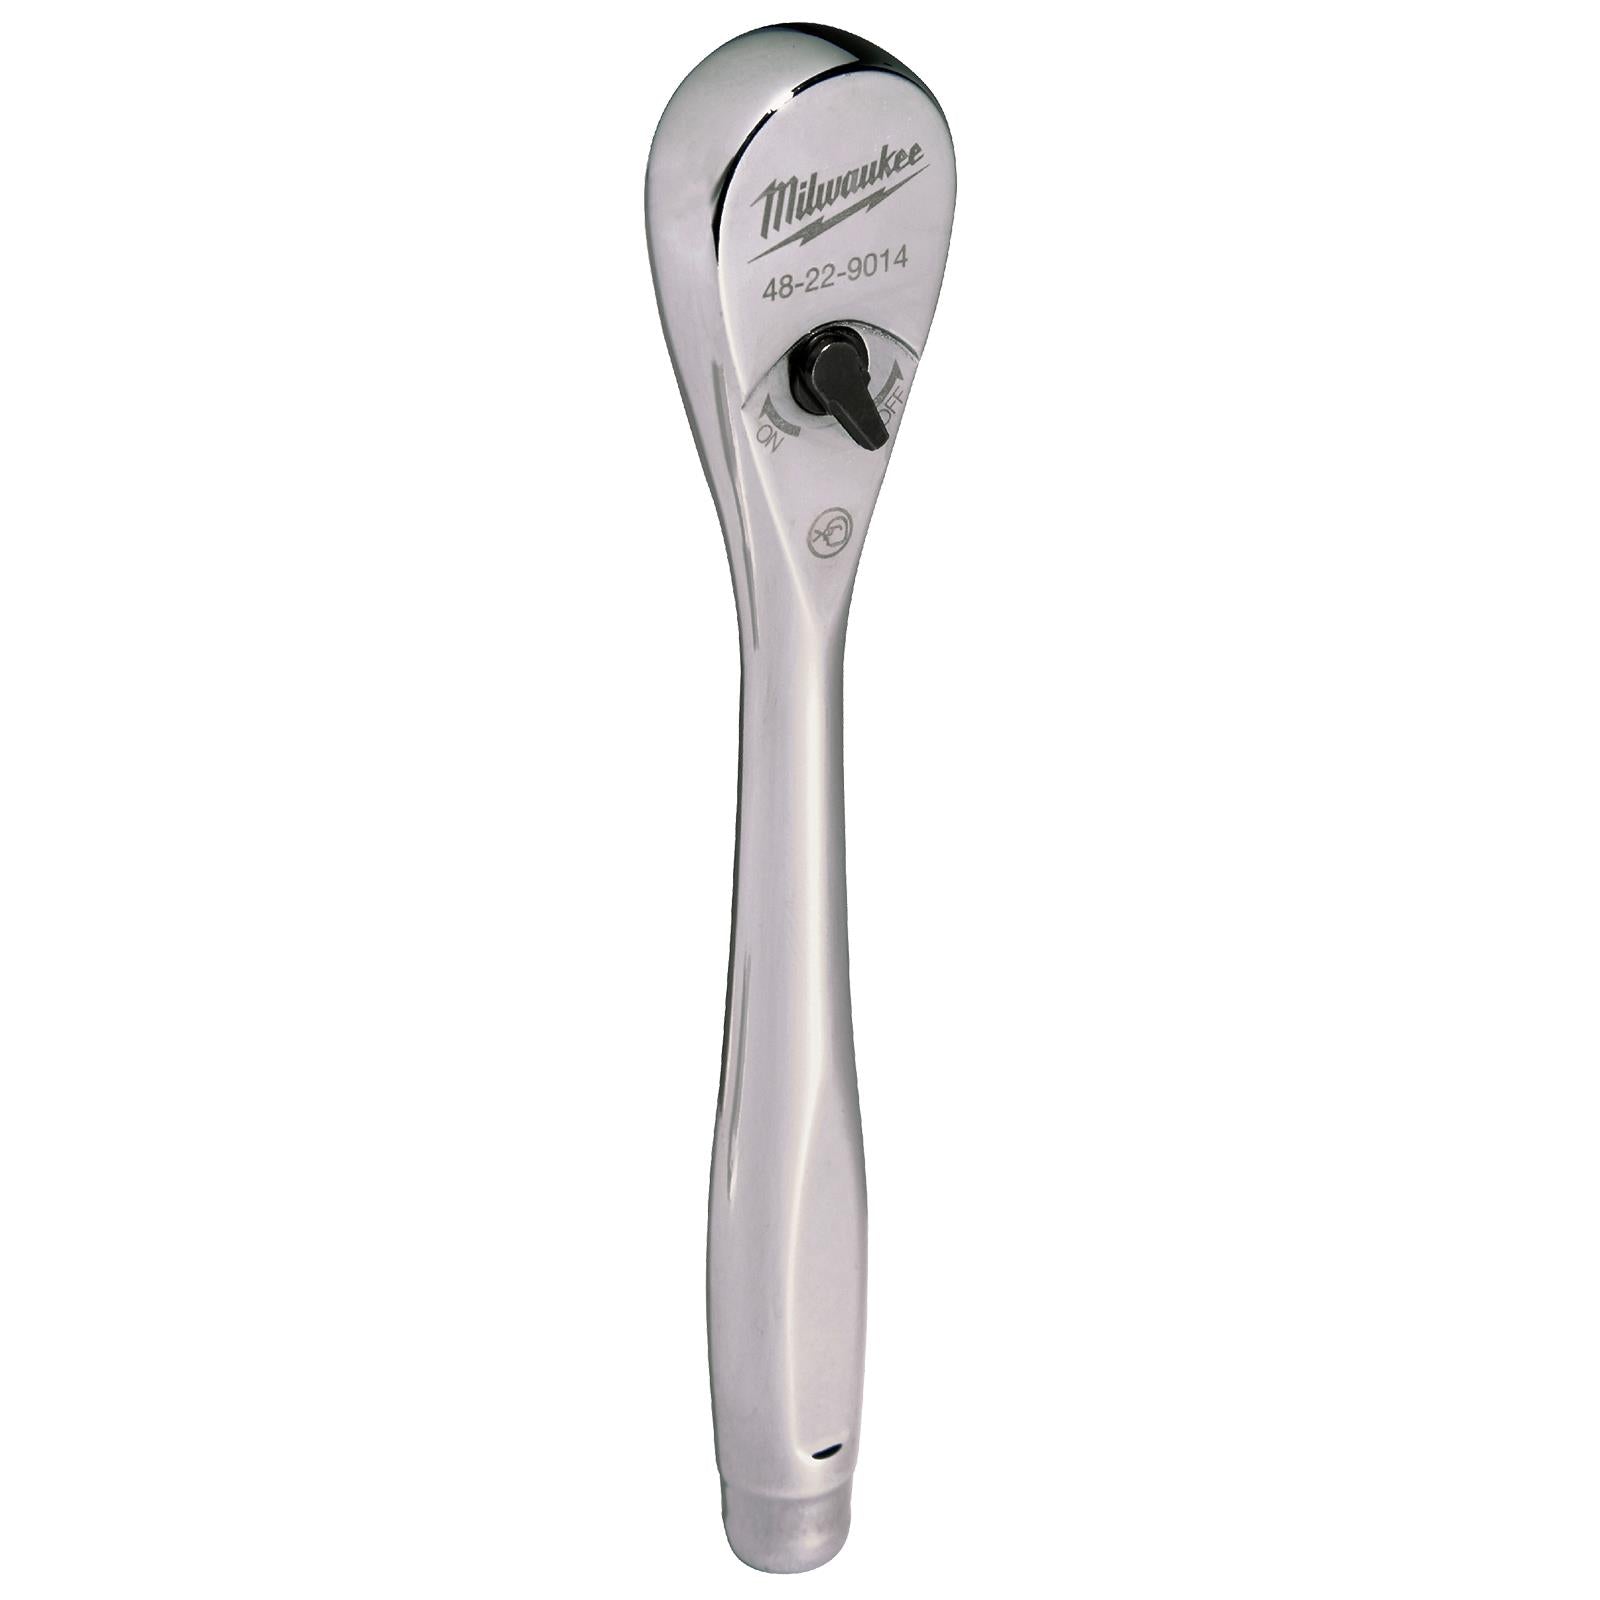 Milwaukee Socket Ratchet Wrench 1/4" Drive 90 Tooth 152mm